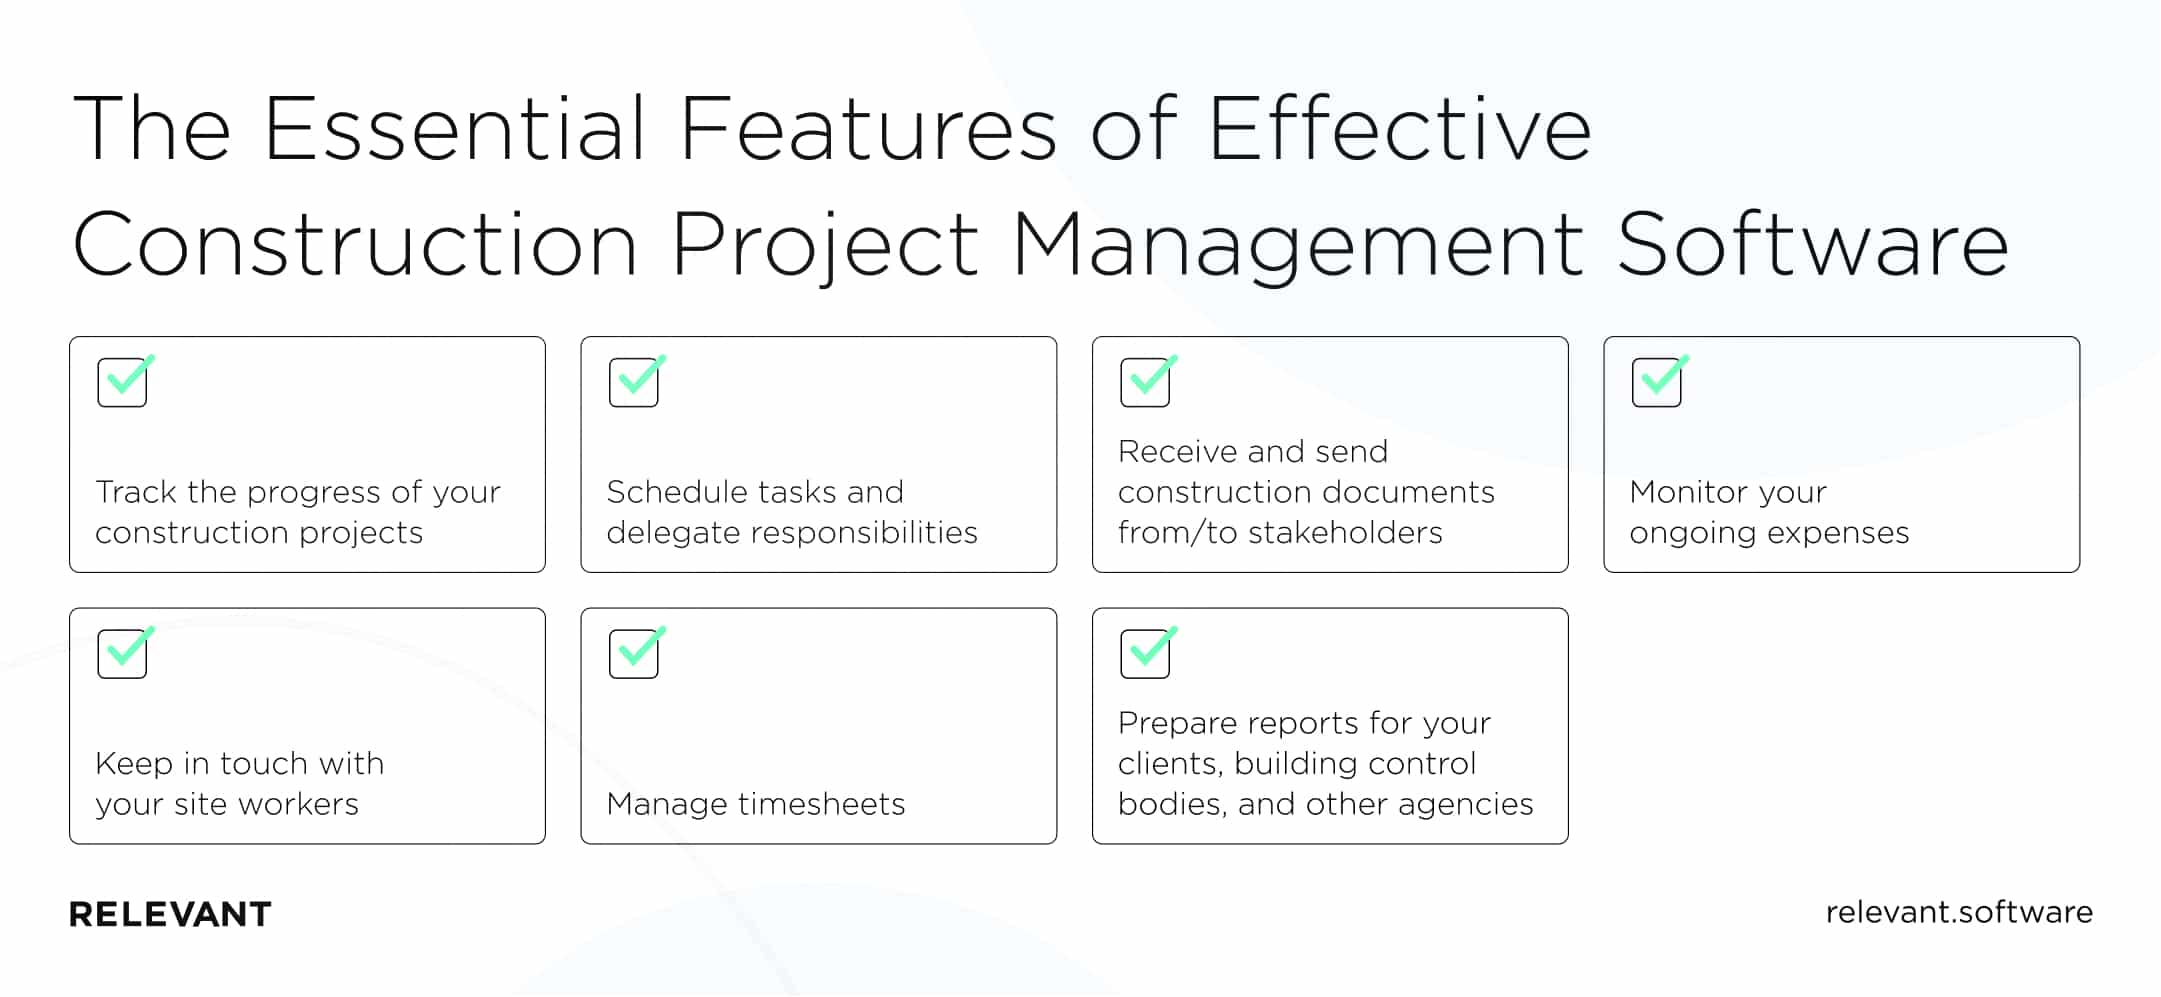 The Essential Features of Effective Construction Project Management Software